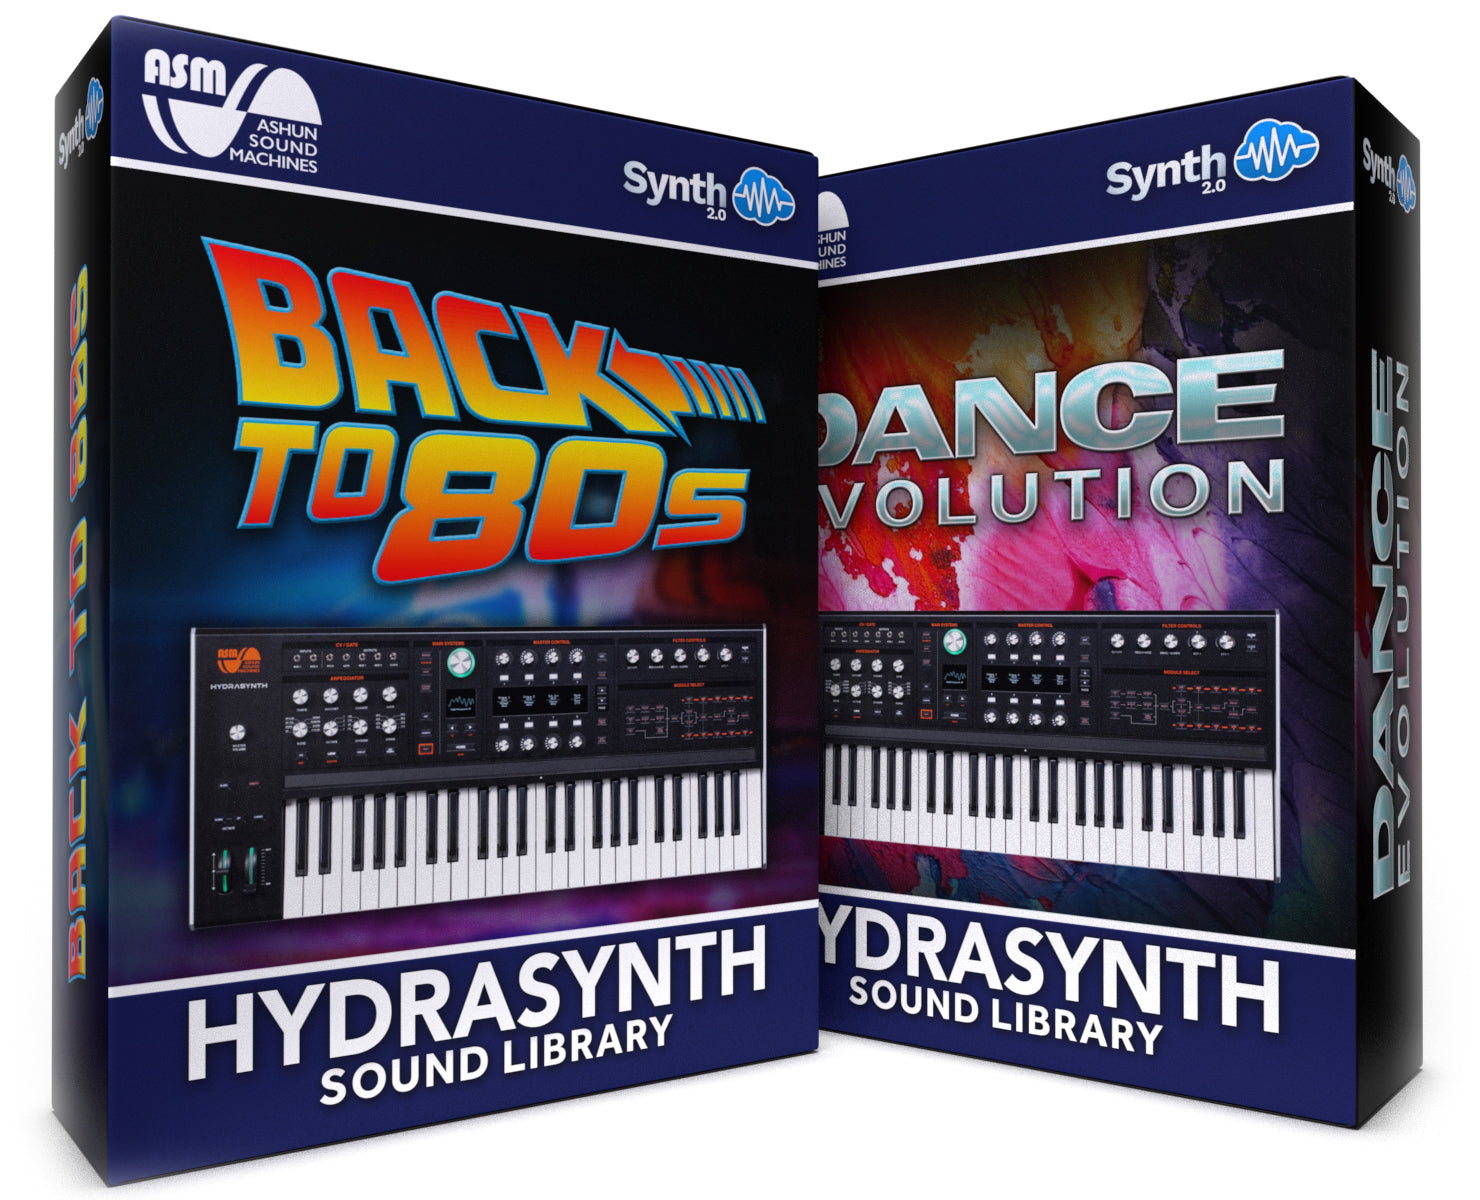 SCL140 - ( Bundle ) - Back to 80s + Dance Evolution - ASM Hydrasynth Series